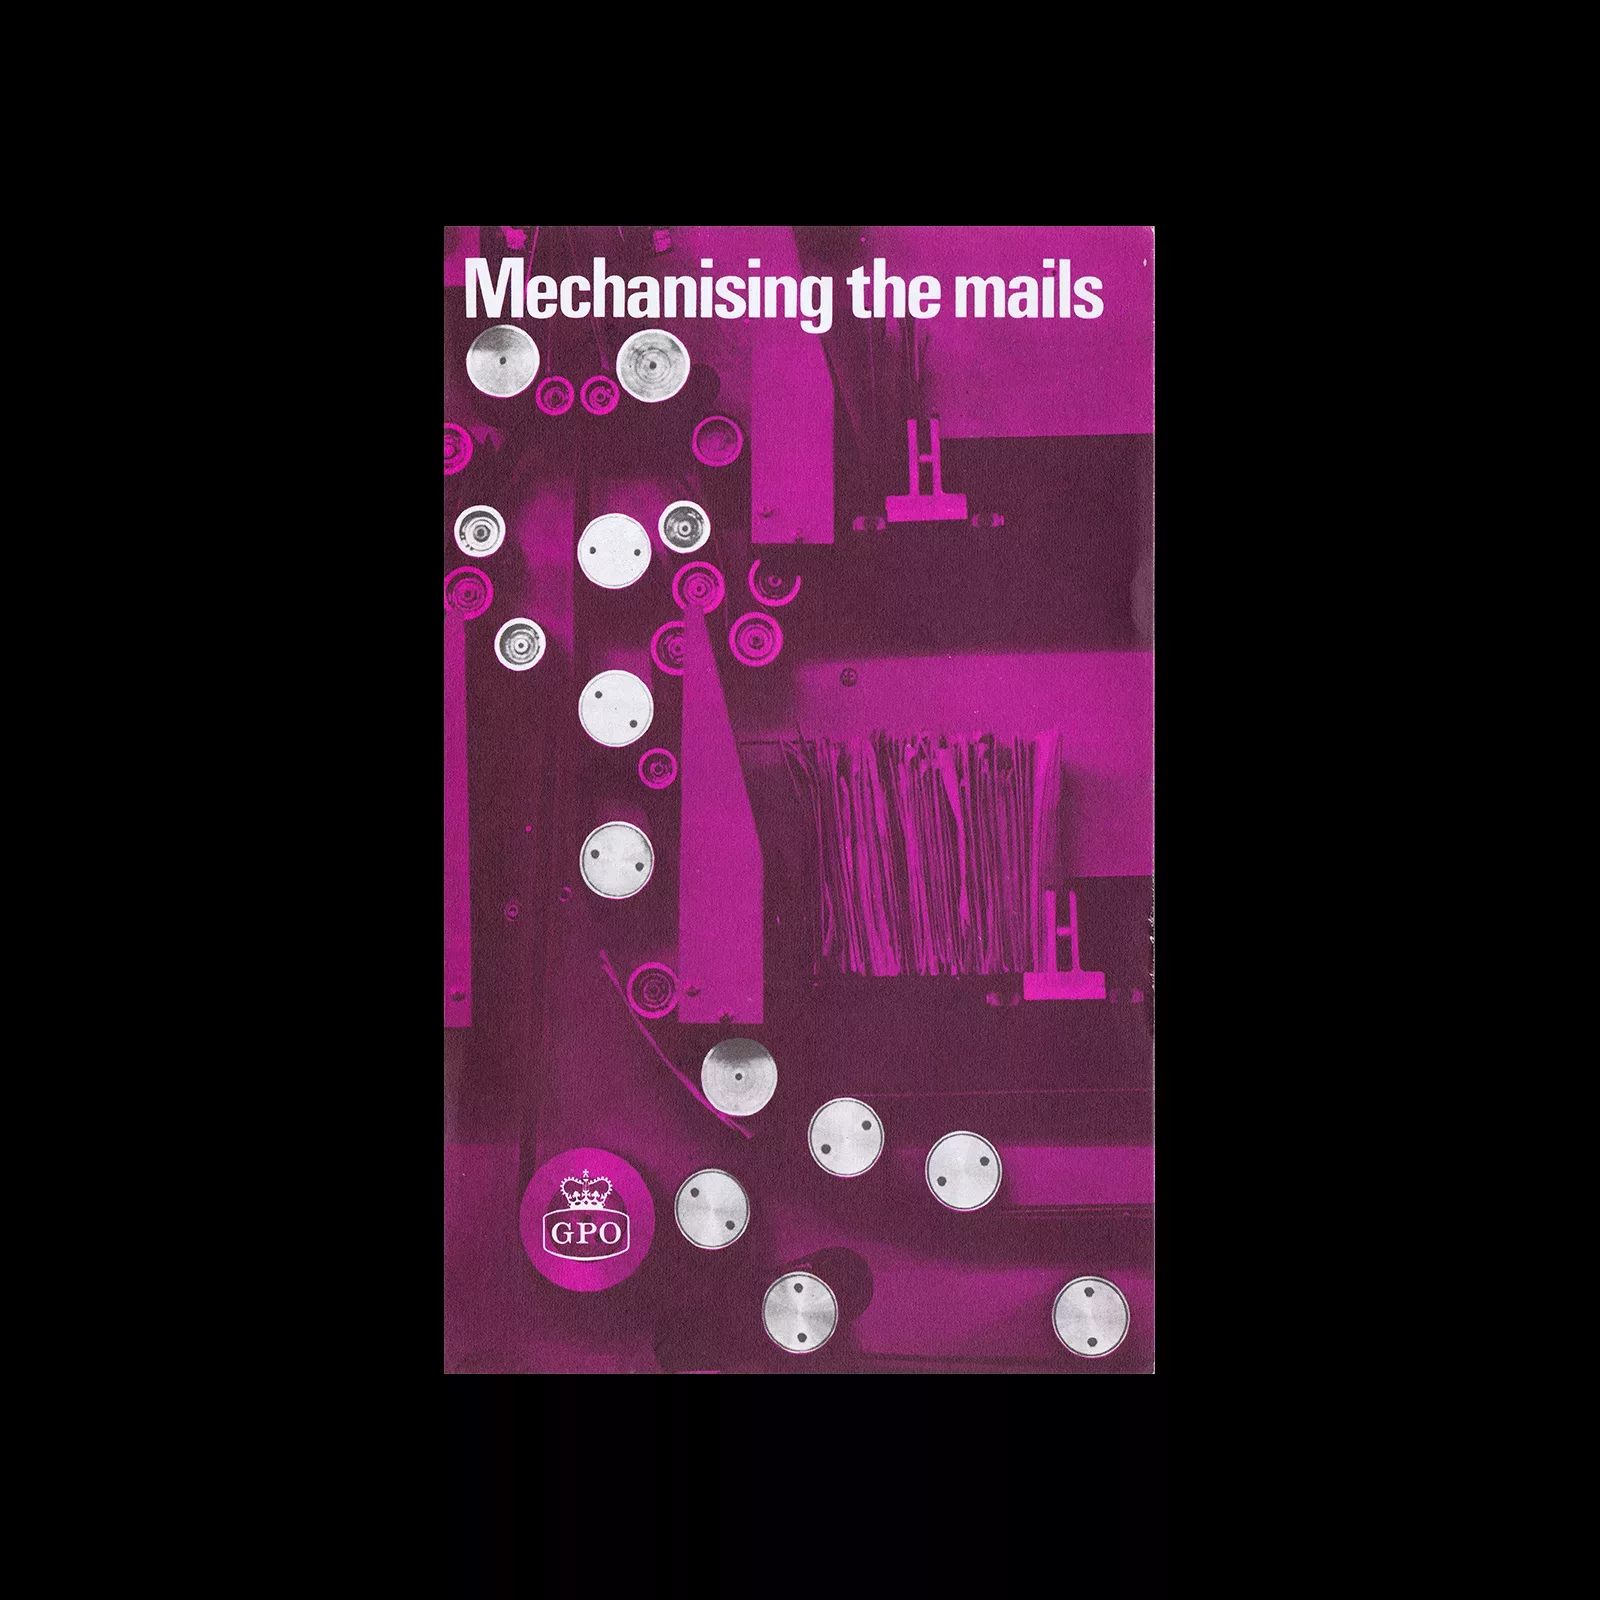 Mechanising the Mails, General Post Office (GPO), May 1967. Designed by K Dartford & Partners